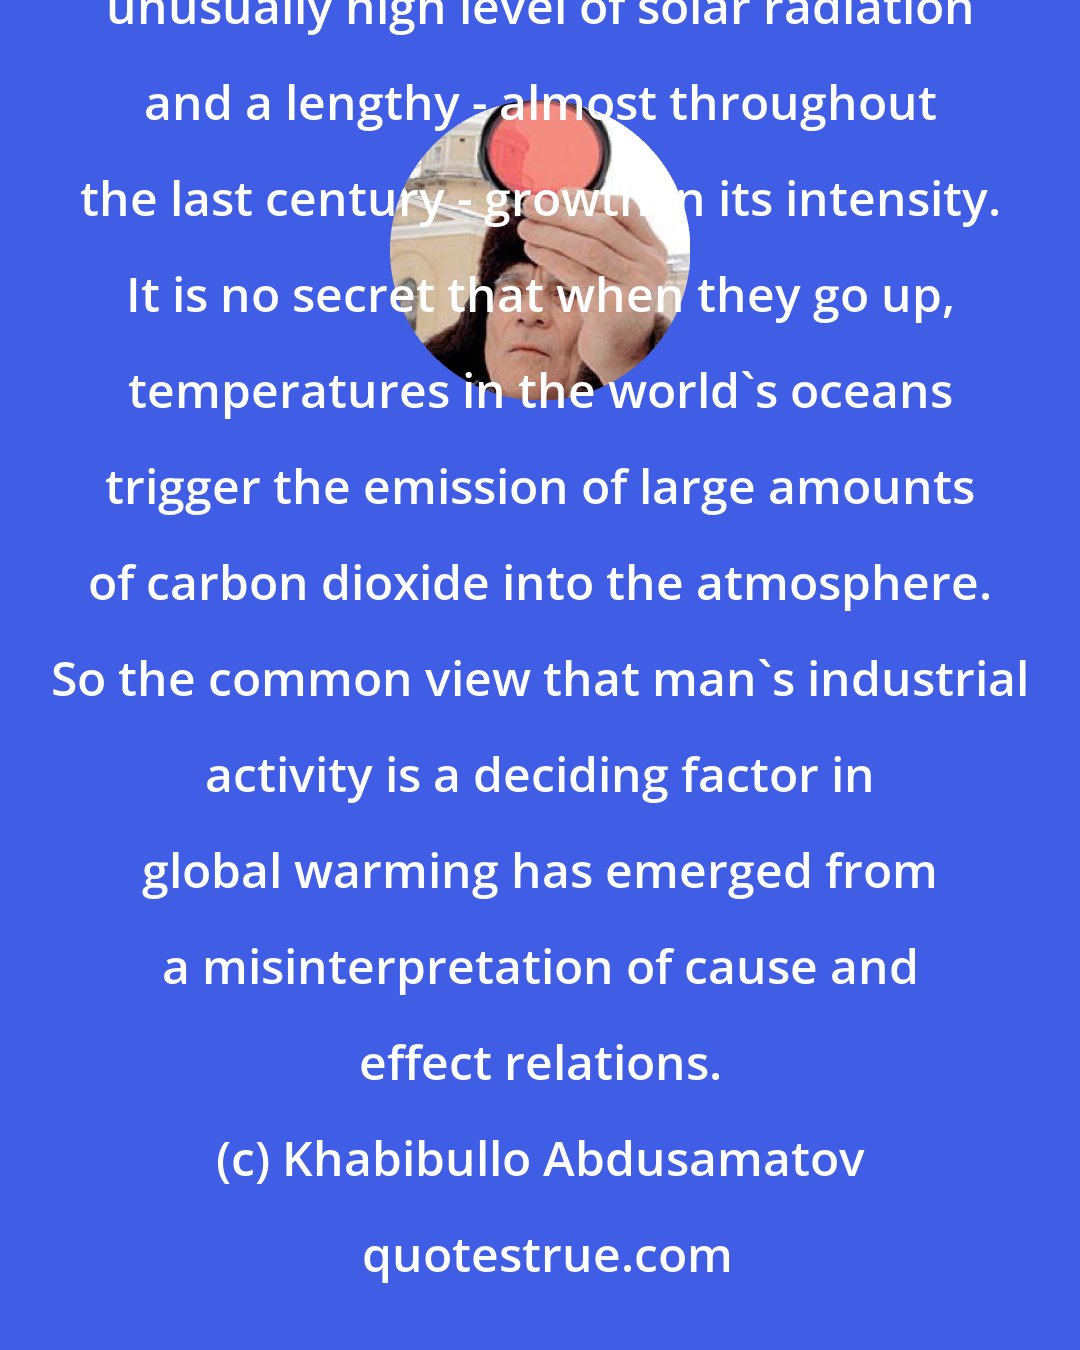 Khabibullo Abdusamatov: Global warming results not from the emission of greenhouse gases into the atmosphere, but from an unusually high level of solar radiation and a lengthy - almost throughout the last century - growth in its intensity. It is no secret that when they go up, temperatures in the world's oceans trigger the emission of large amounts of carbon dioxide into the atmosphere. So the common view that man's industrial activity is a deciding factor in global warming has emerged from a misinterpretation of cause and effect relations.